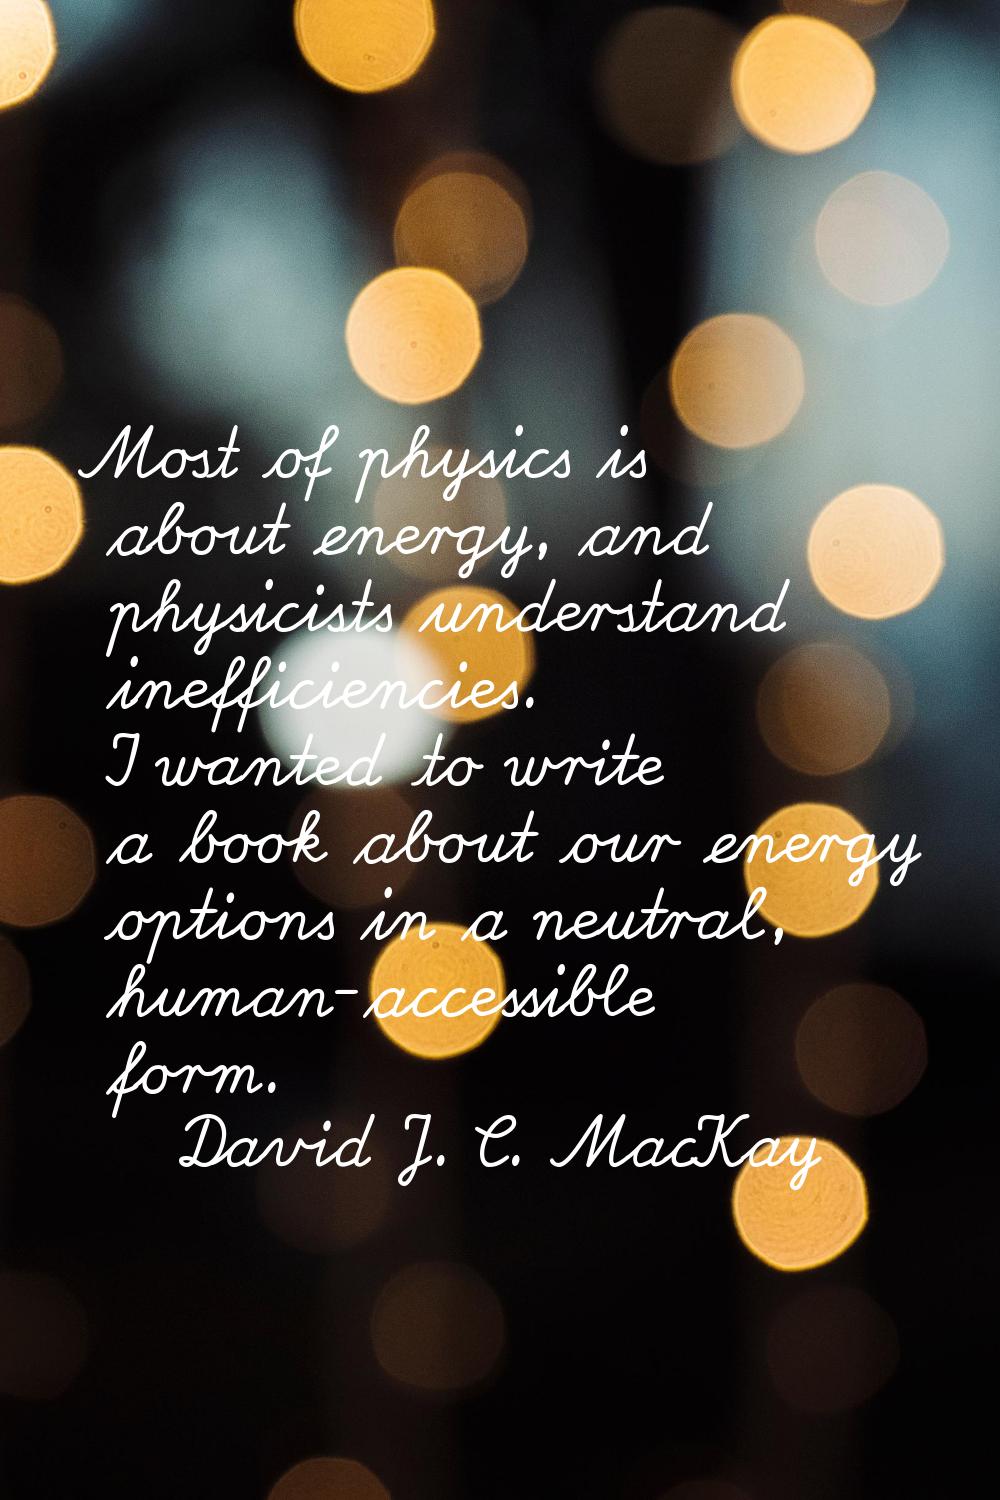 Most of physics is about energy, and physicists understand inefficiencies. I wanted to write a book